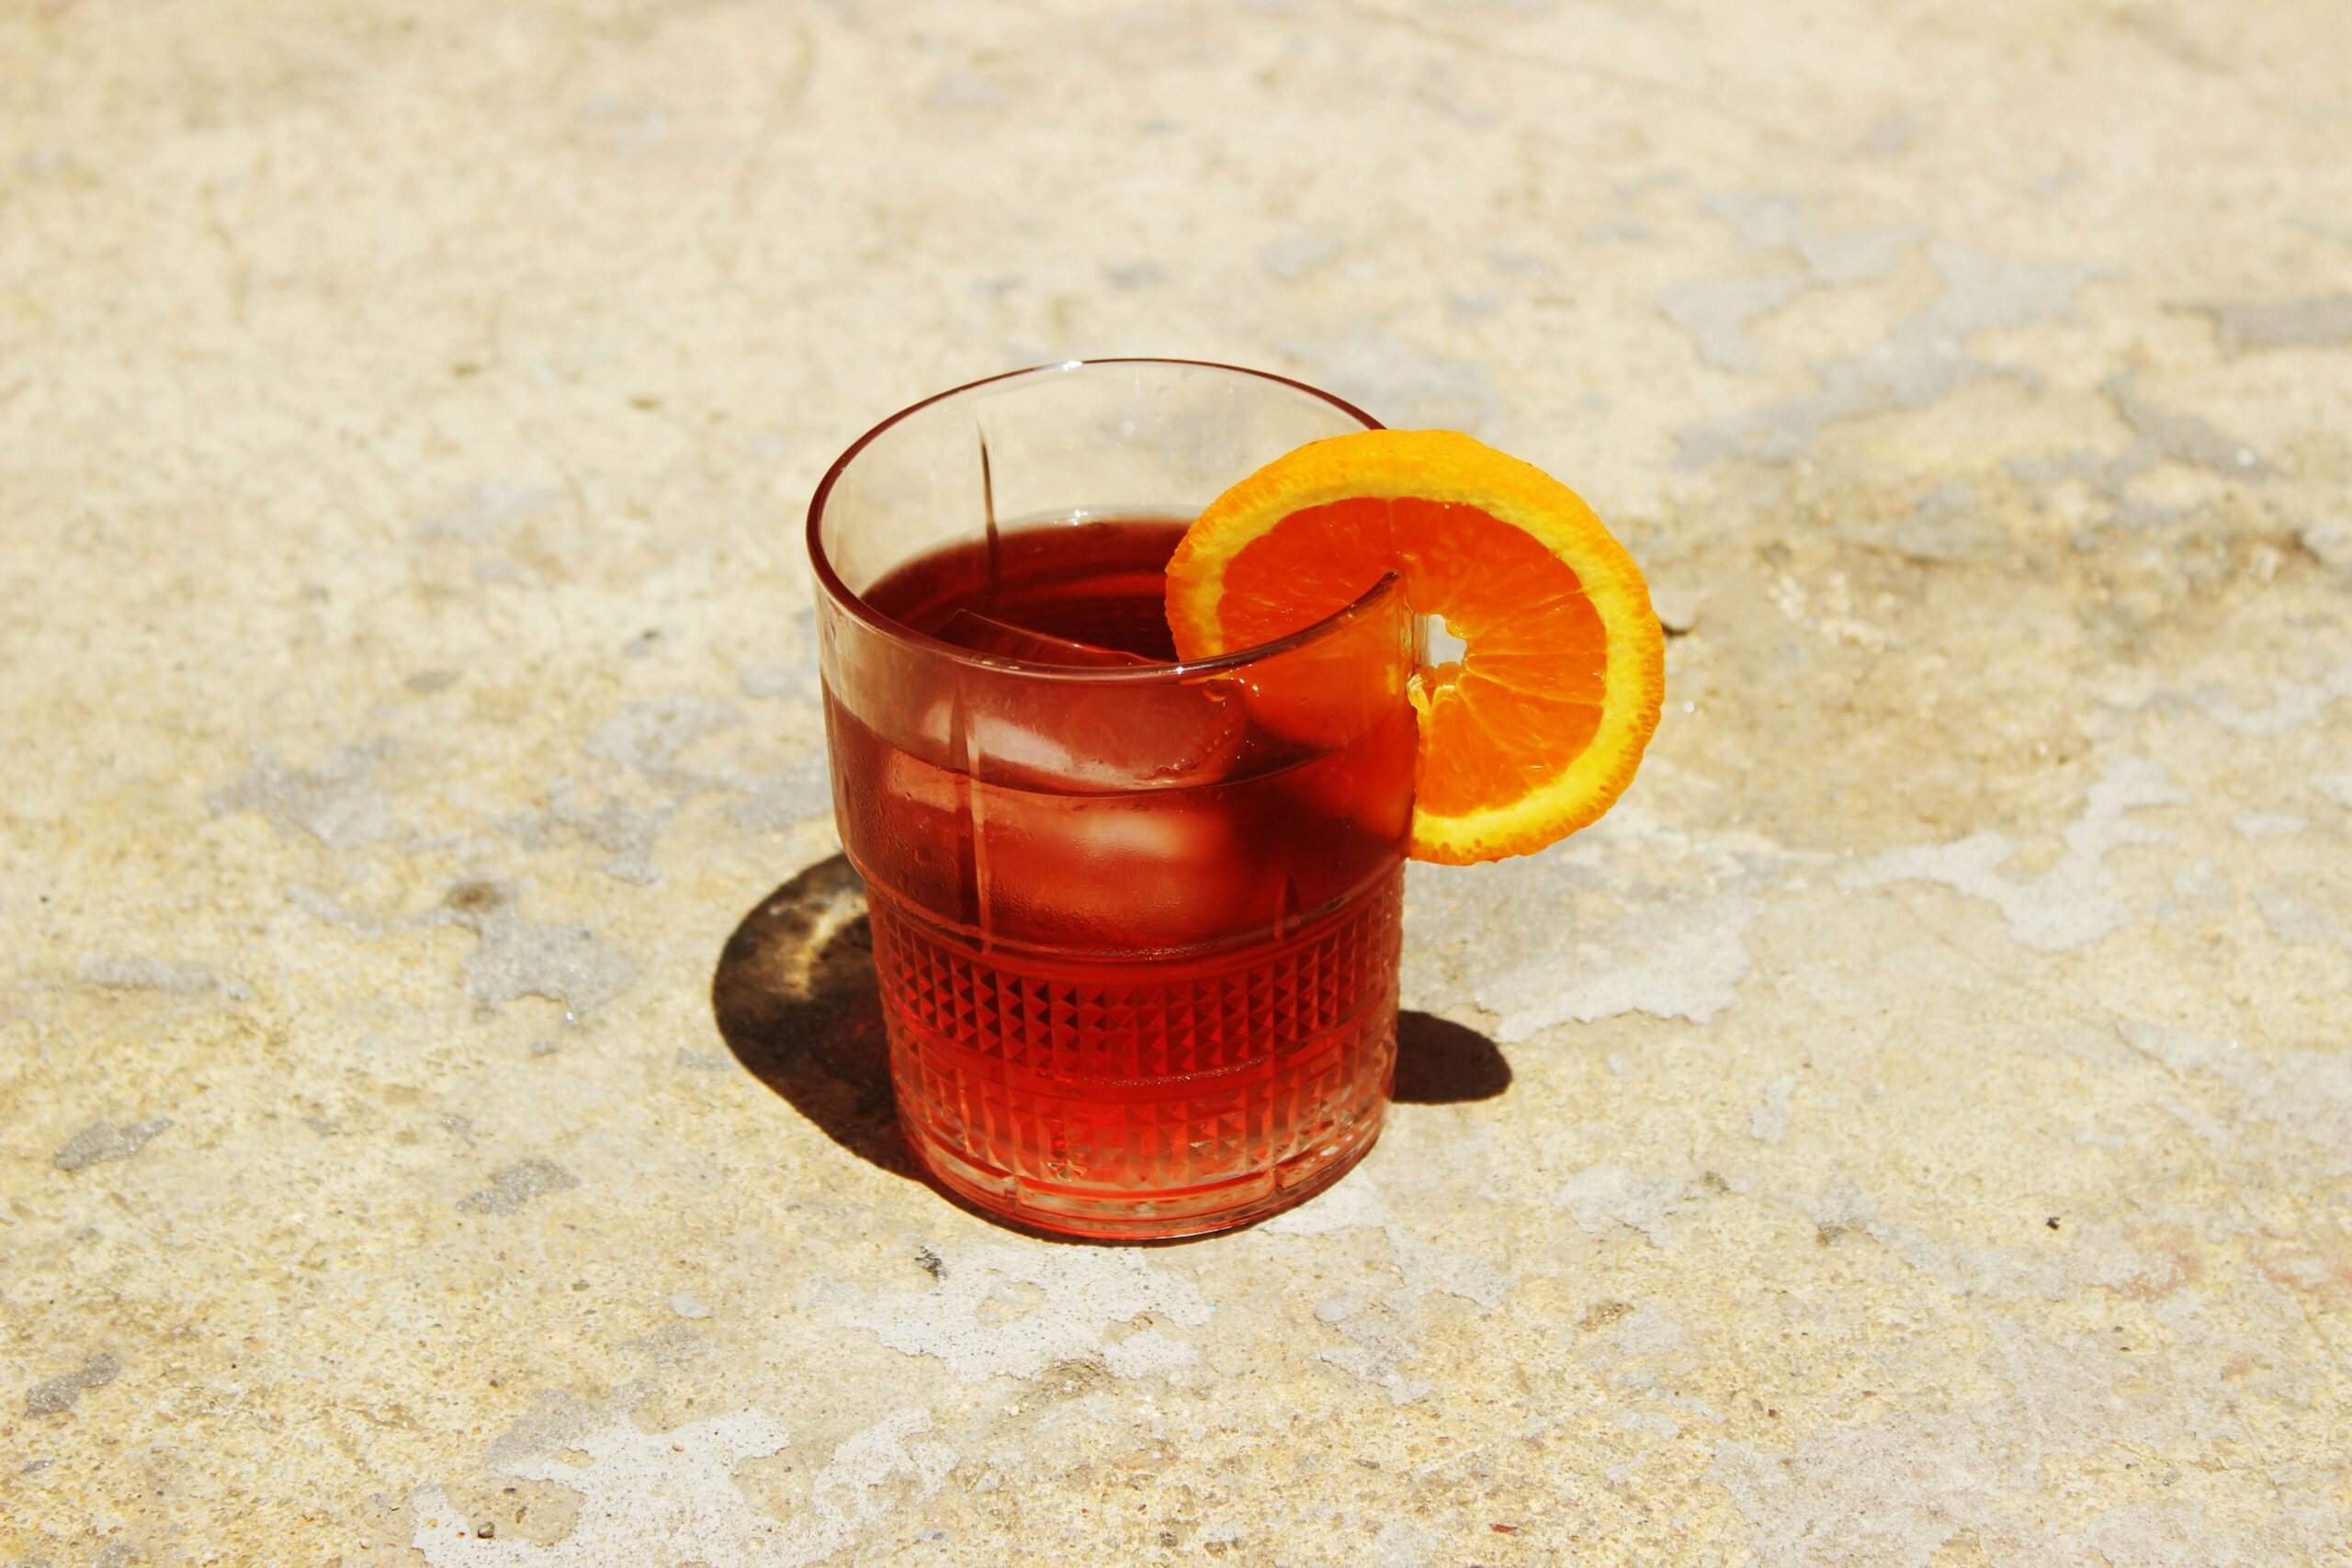 This solar eclipse cocktail is the perfect balance of fruity with a strong alcoholic taste. Pictured: An orange cocktail